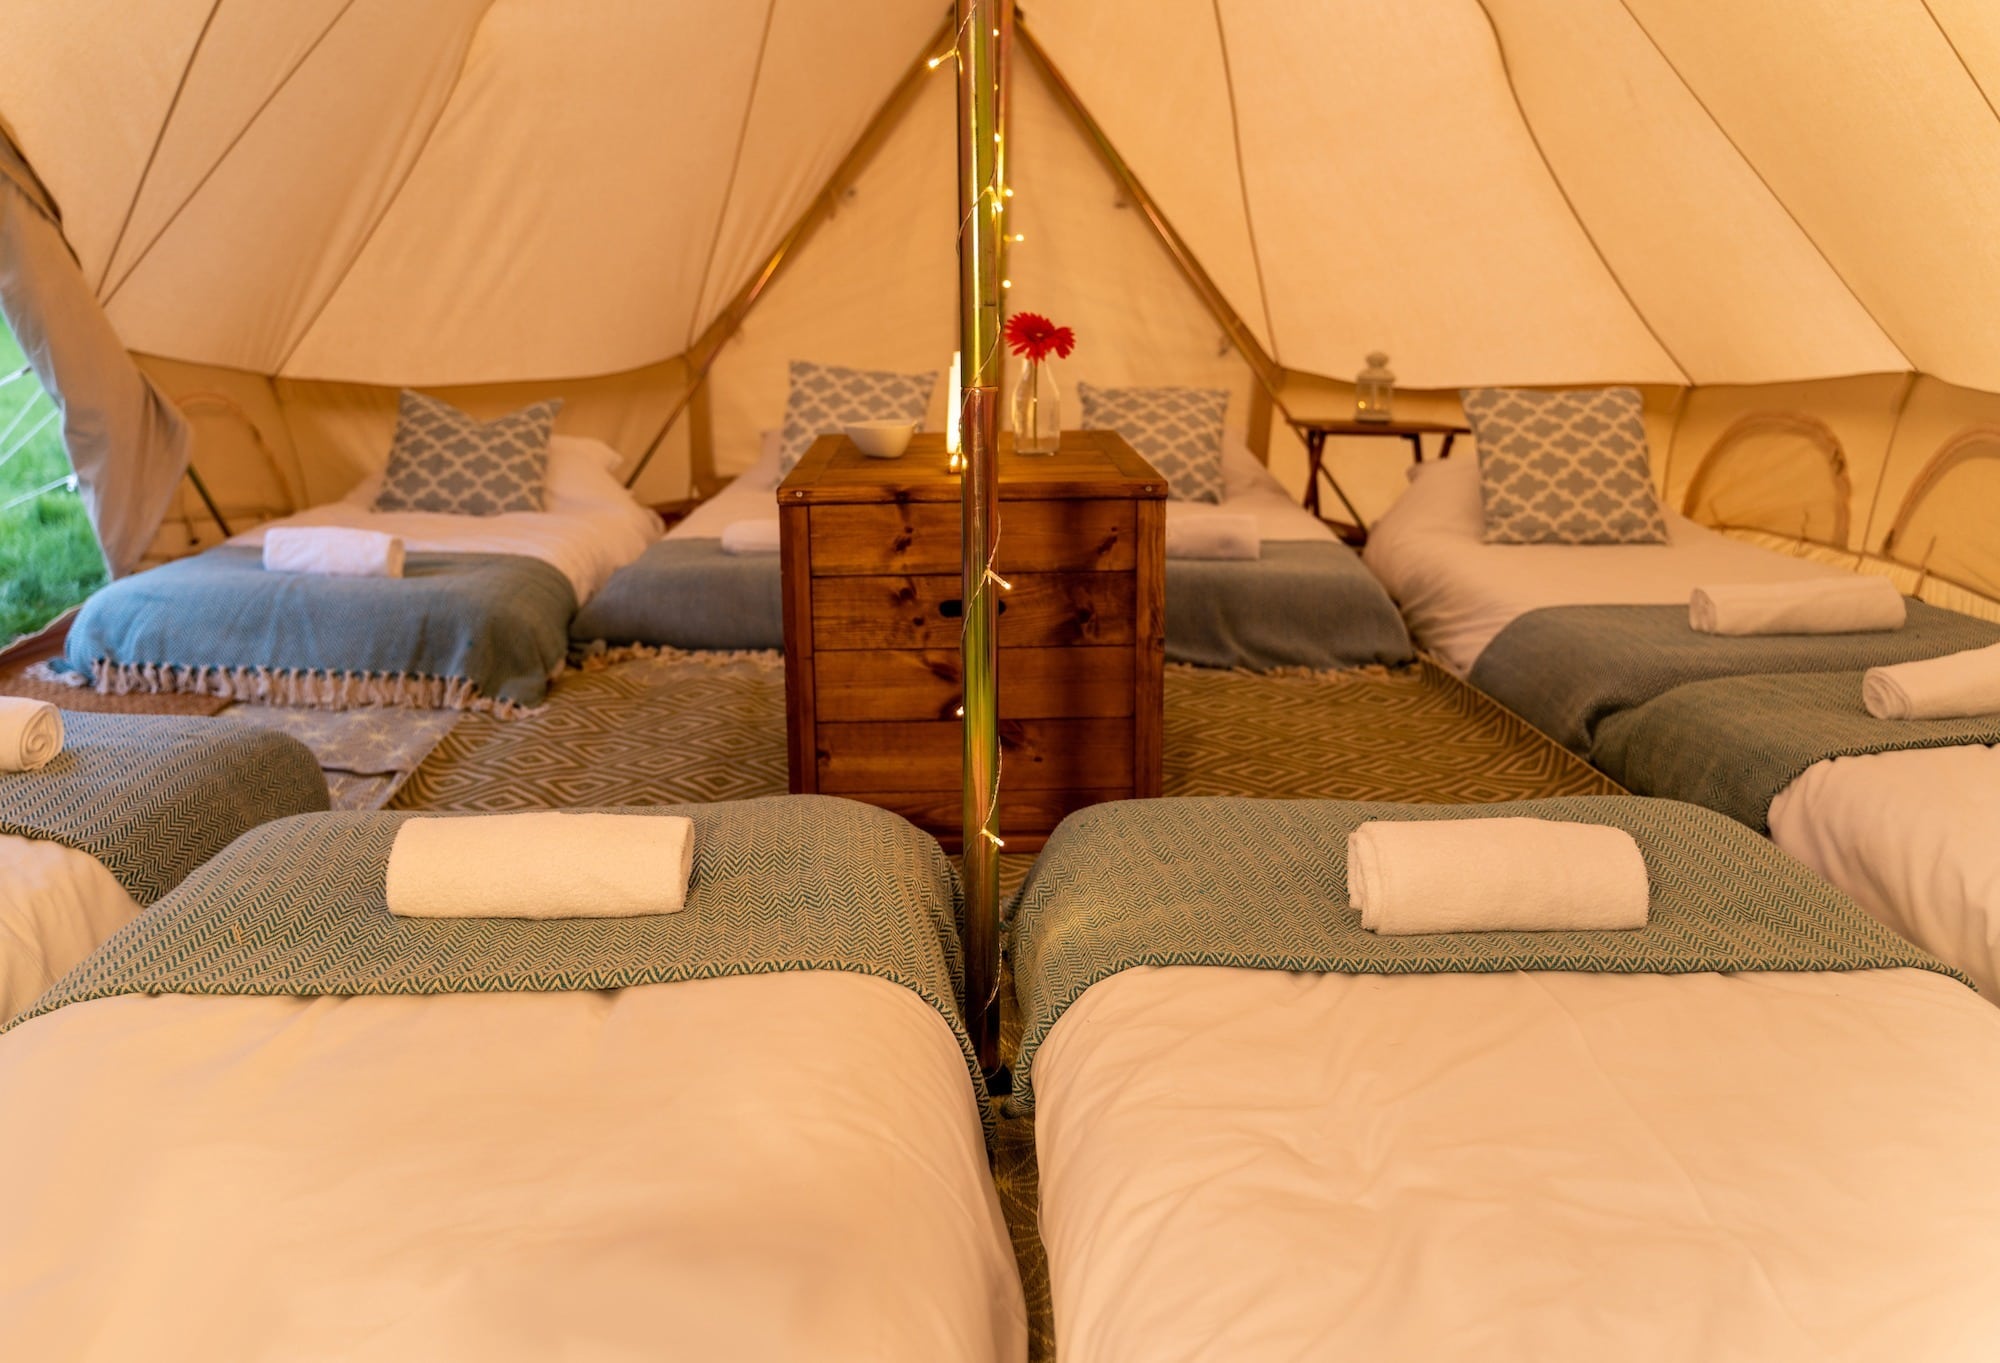 Emperor Bell Tent with a classic sleeping layout